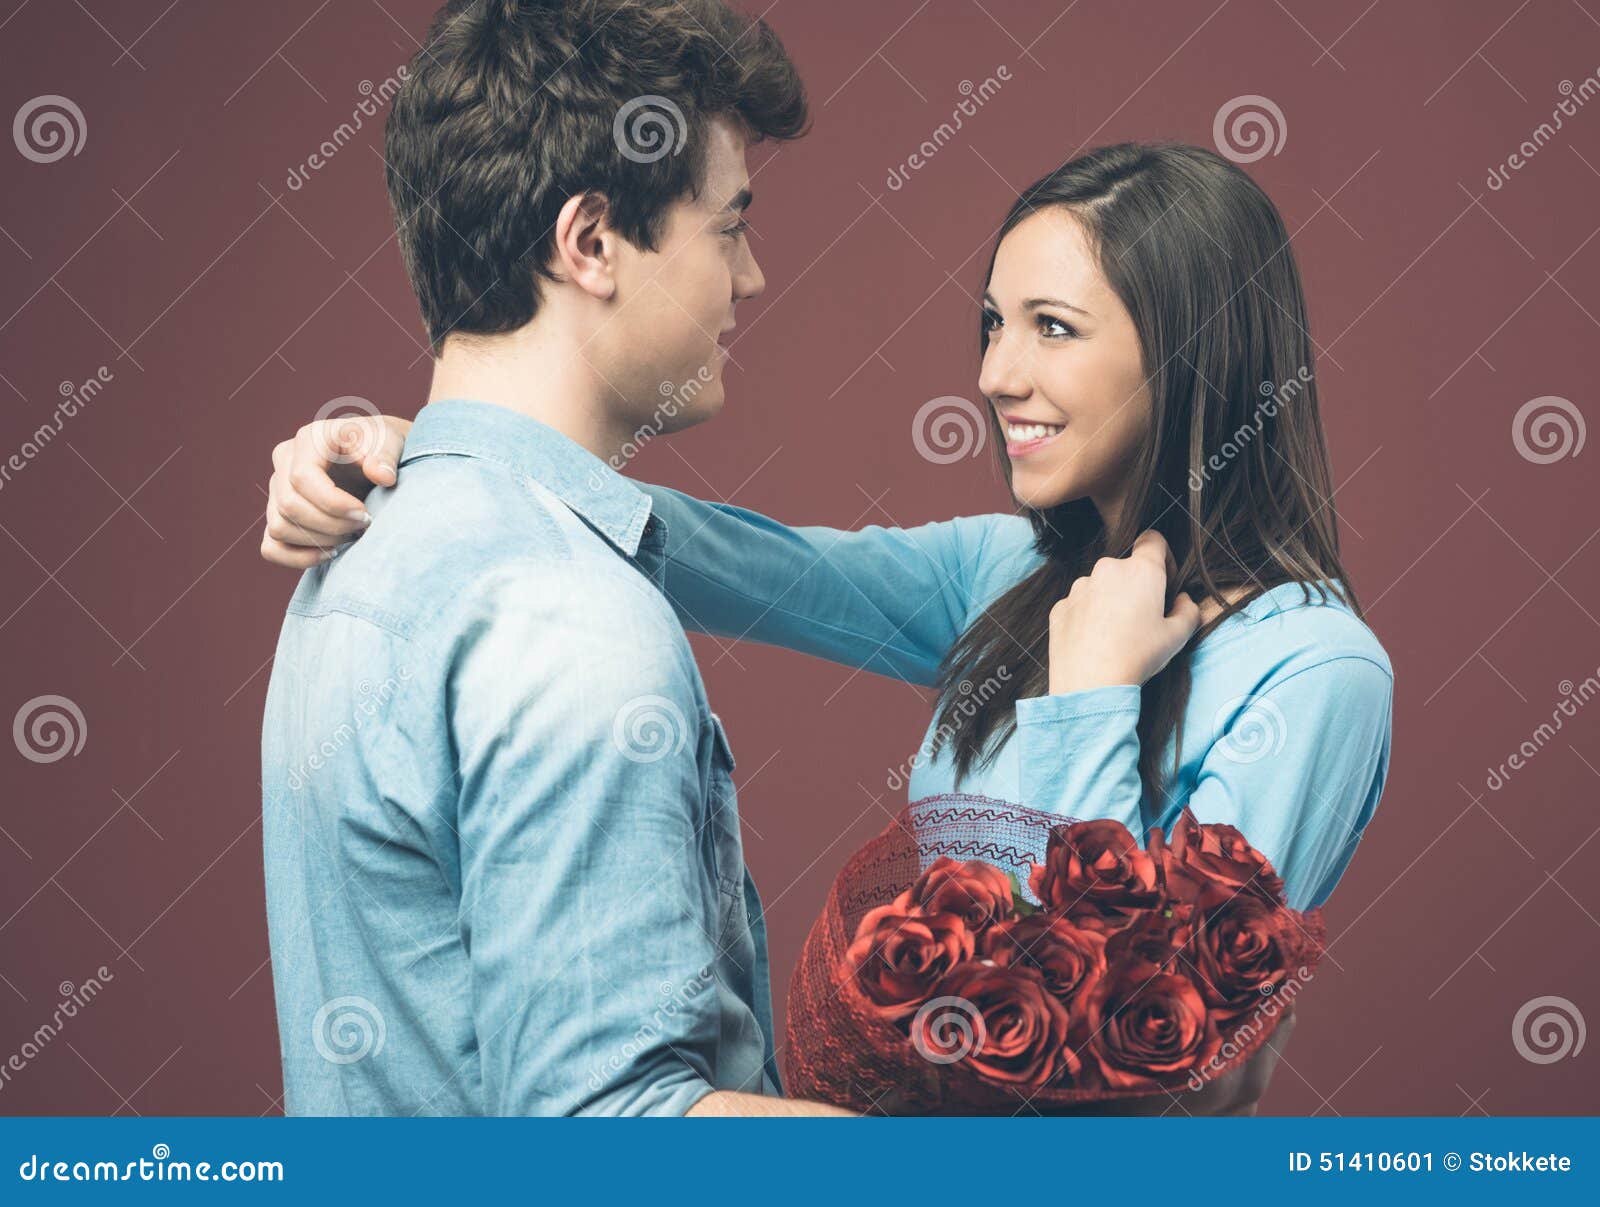 Smiling Woman Receiving a Love Gift Stock Image - Image of affectionate,  giving: 51410601